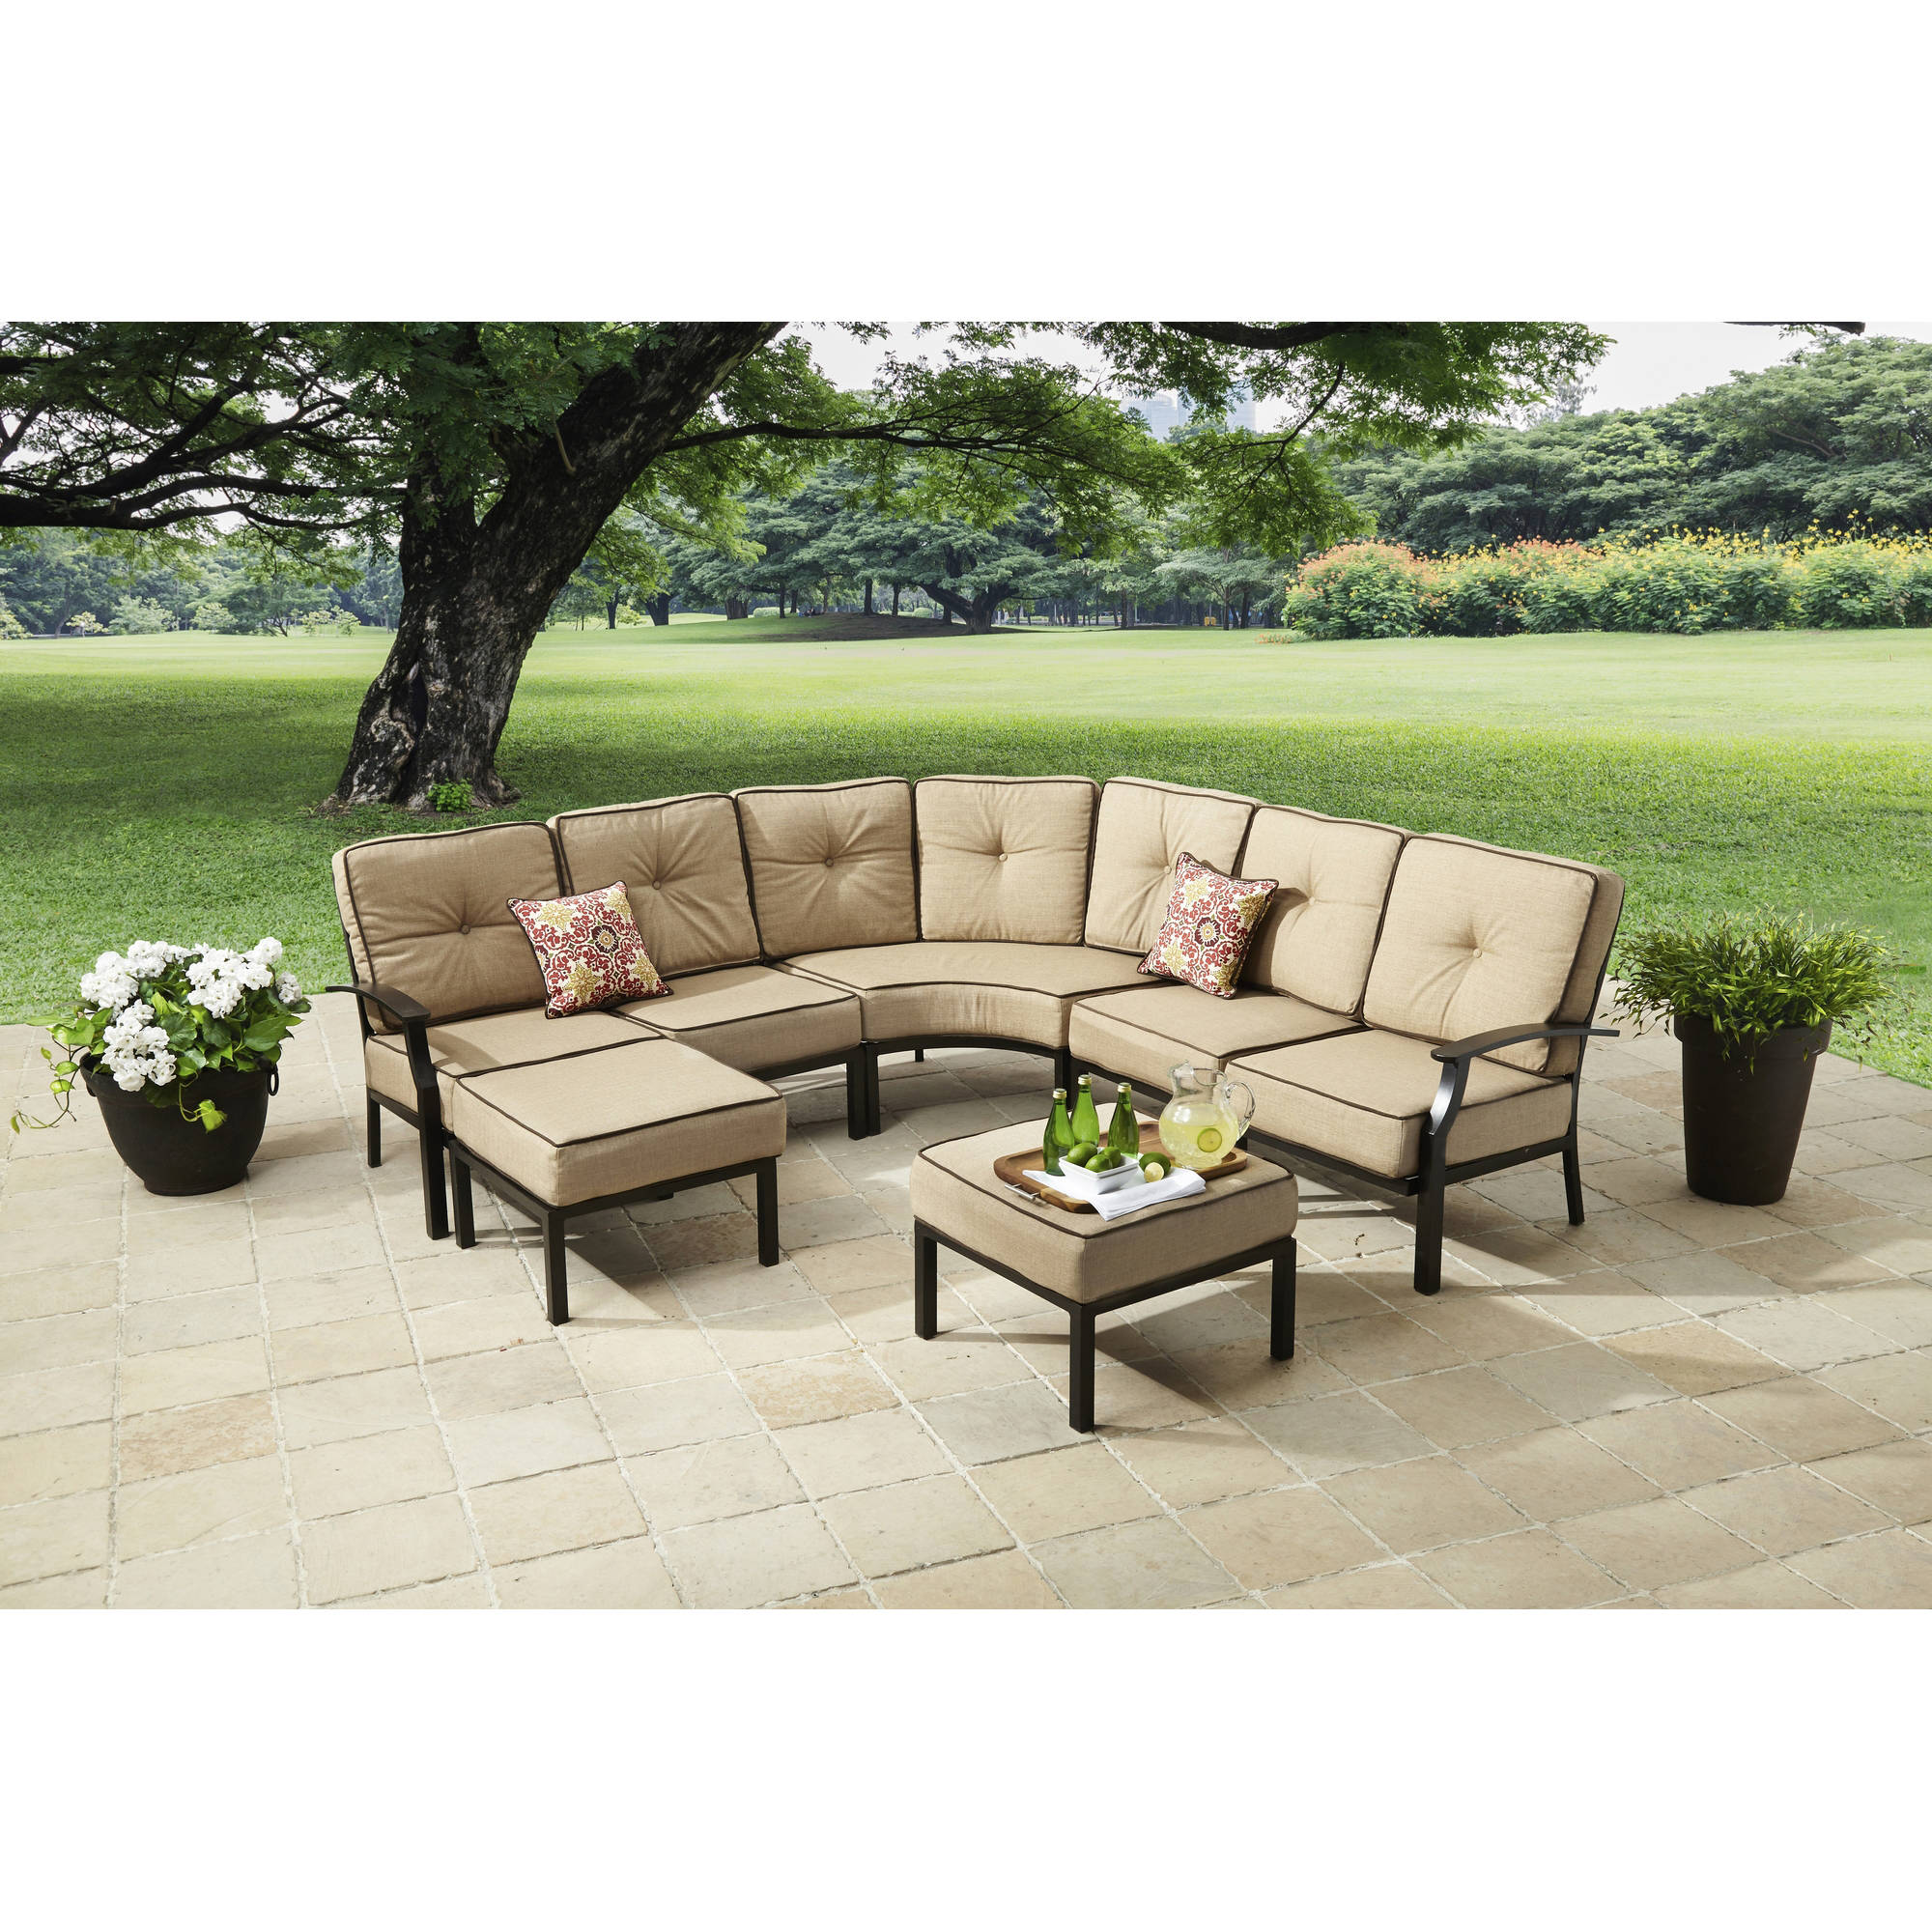 Better Homes&gardens Carter Hills 7pc Sectional Set, Tan - image 1 of 15